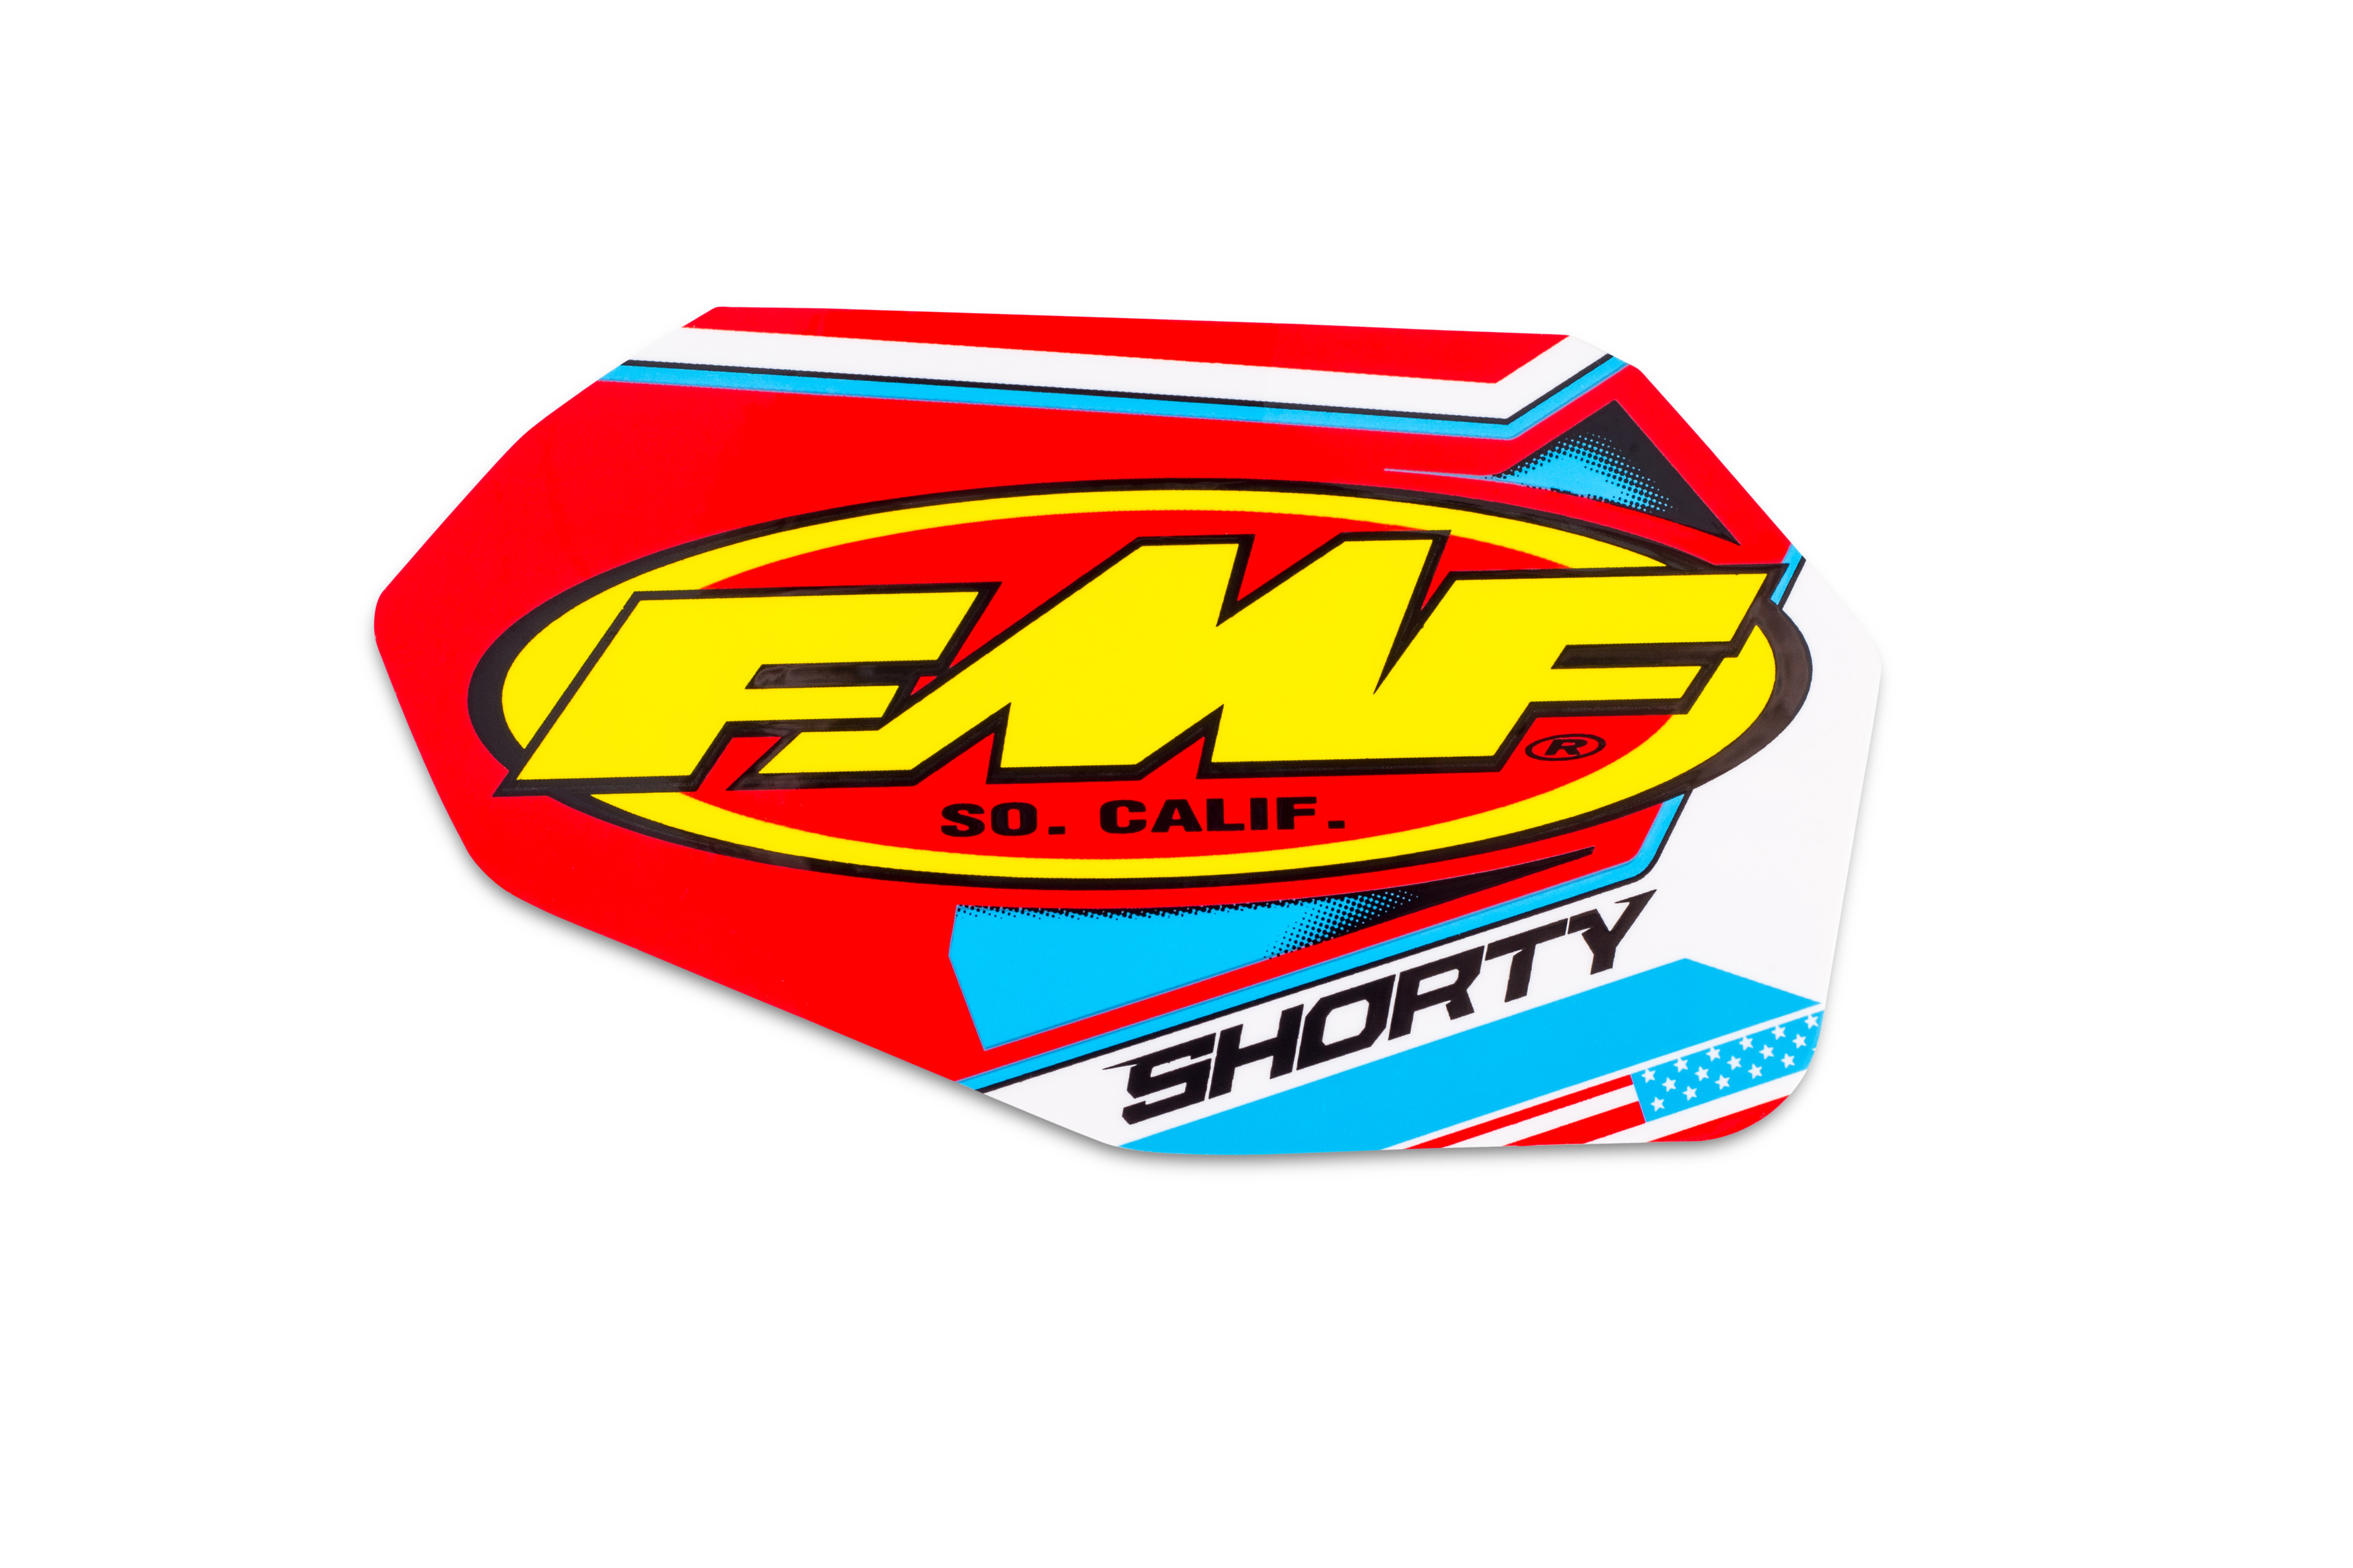 FMF SHORTY NEW VINYL DECAL REPLACEMENT